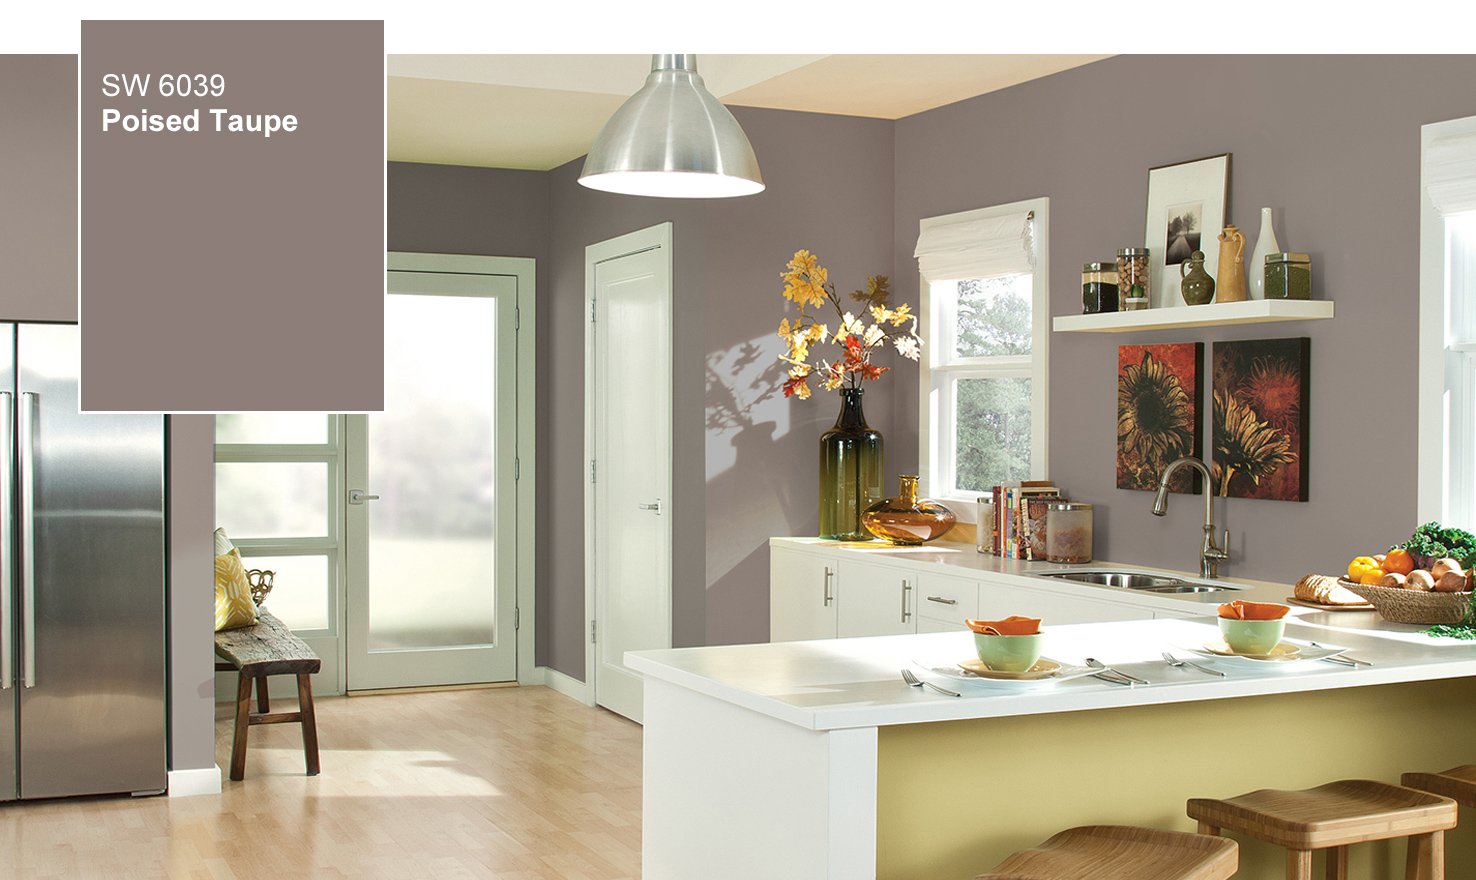 A kitchen with poised taupe walls and a white refrigerator.